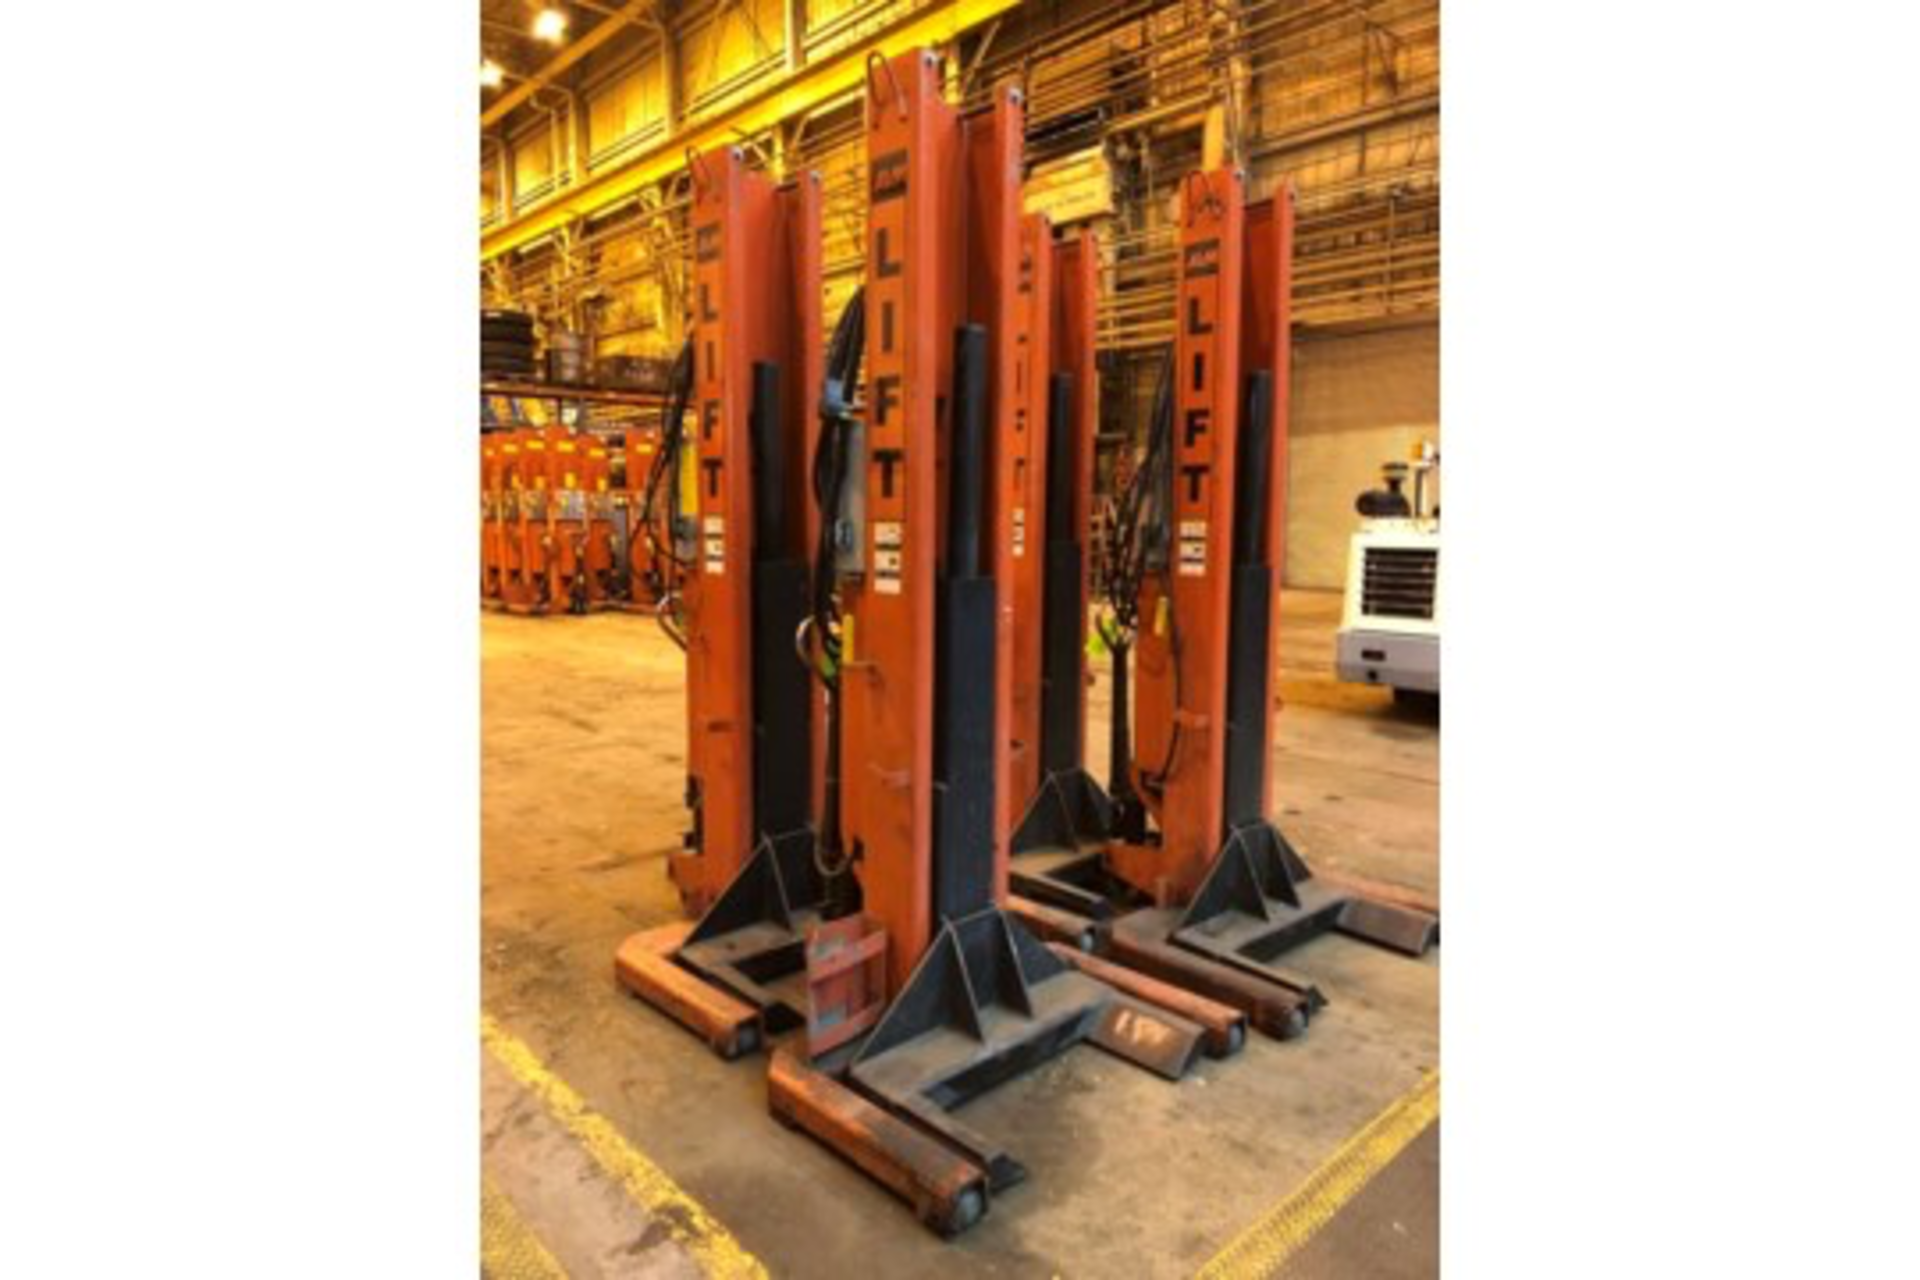 Lot of 4 ALM Portable Truck Jacks 18,000 lbs cap - Image 7 of 8